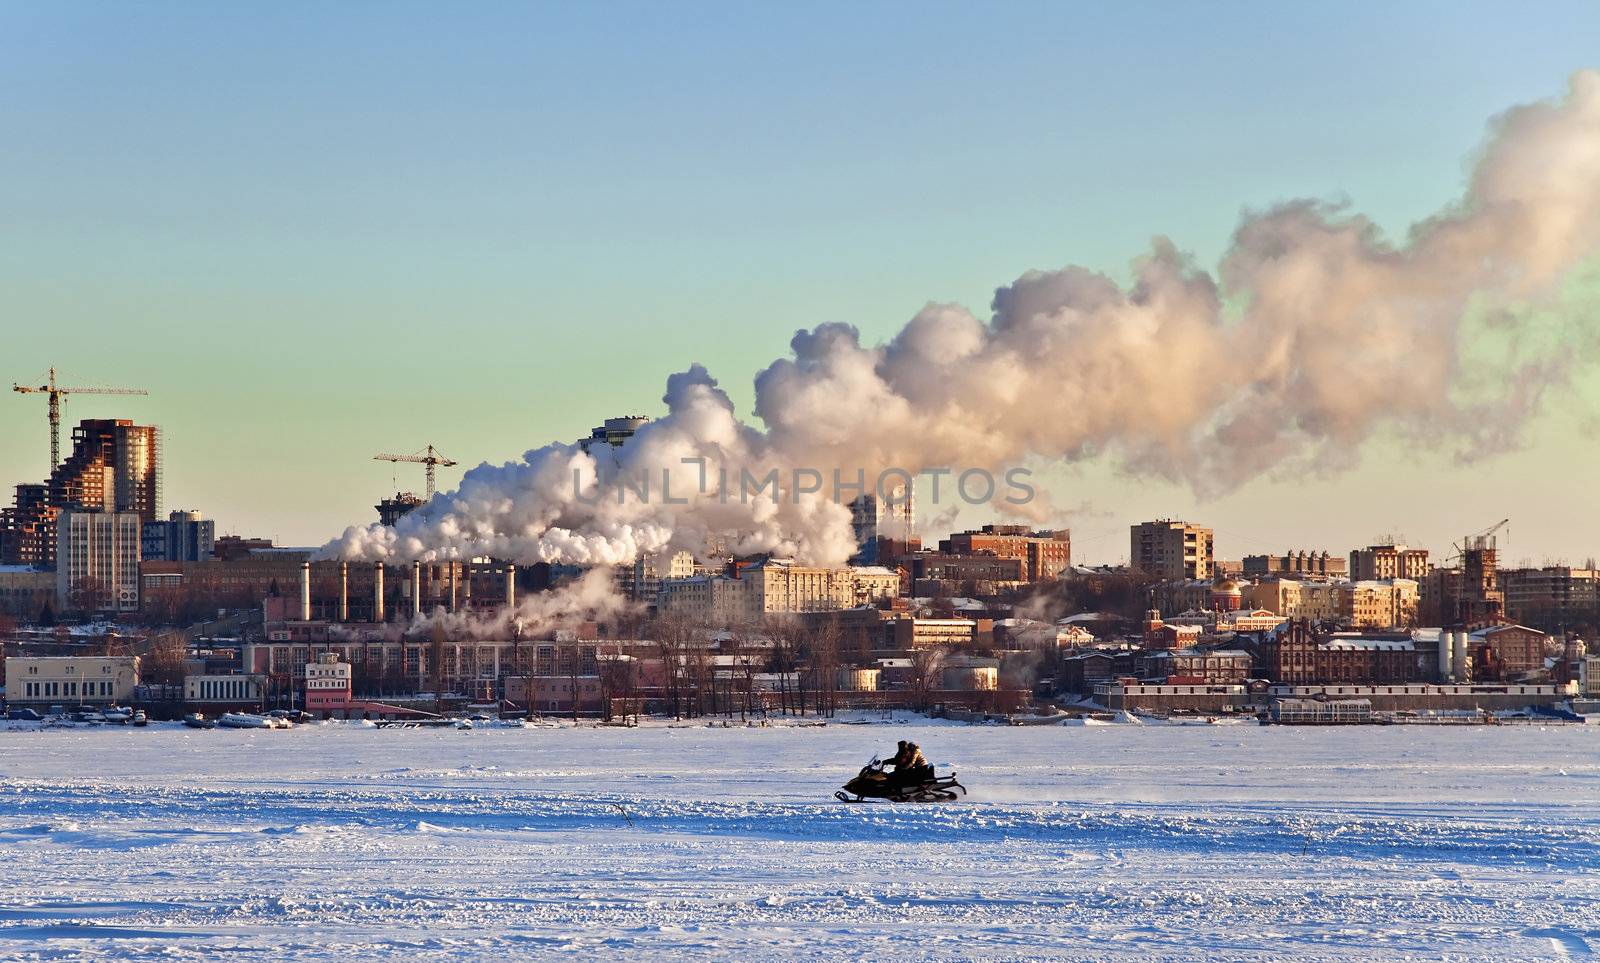 Snowmobile rides on the frozen river in the background of the city with the industrial landscape. Sunset. Samara. Russia.